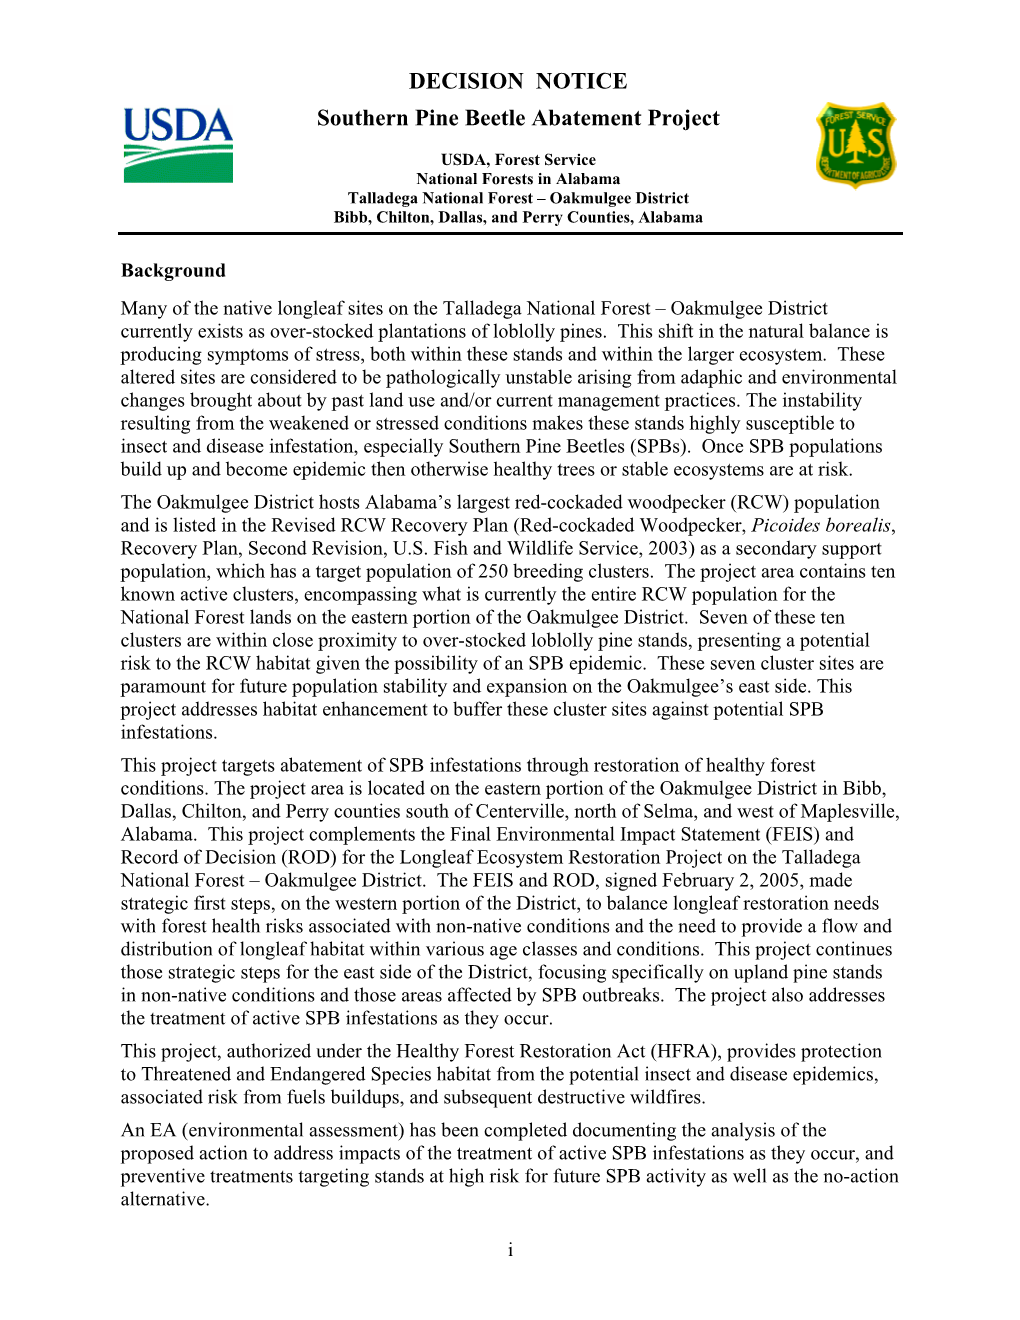 DECISION NOTICE Southern Pine Beetle Abatement Project